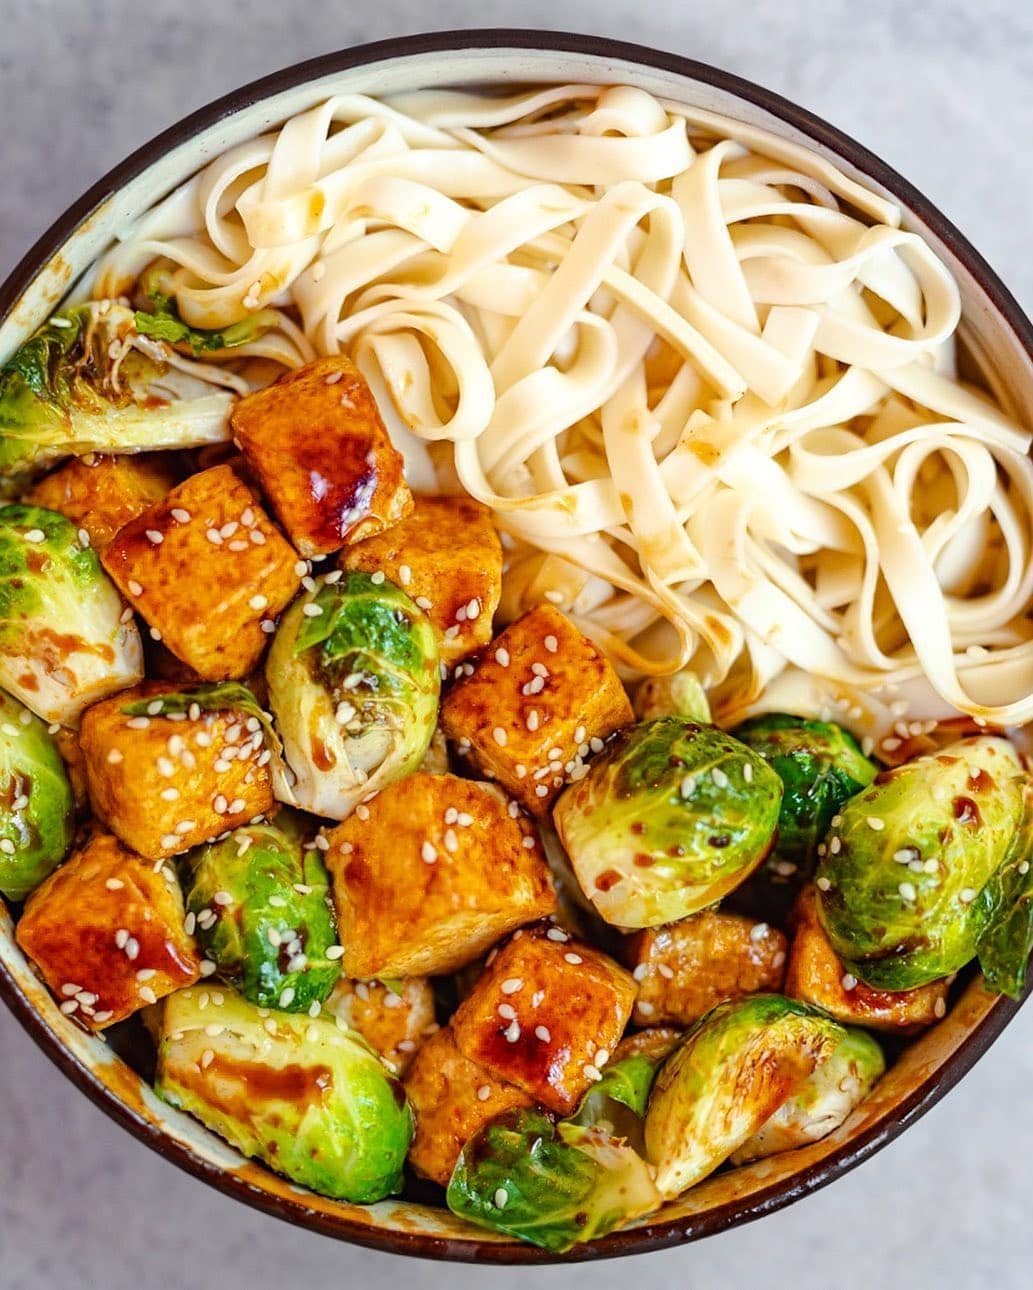 Crispy Tofu and Brussels Sprouts in Hoisin Special Sauce